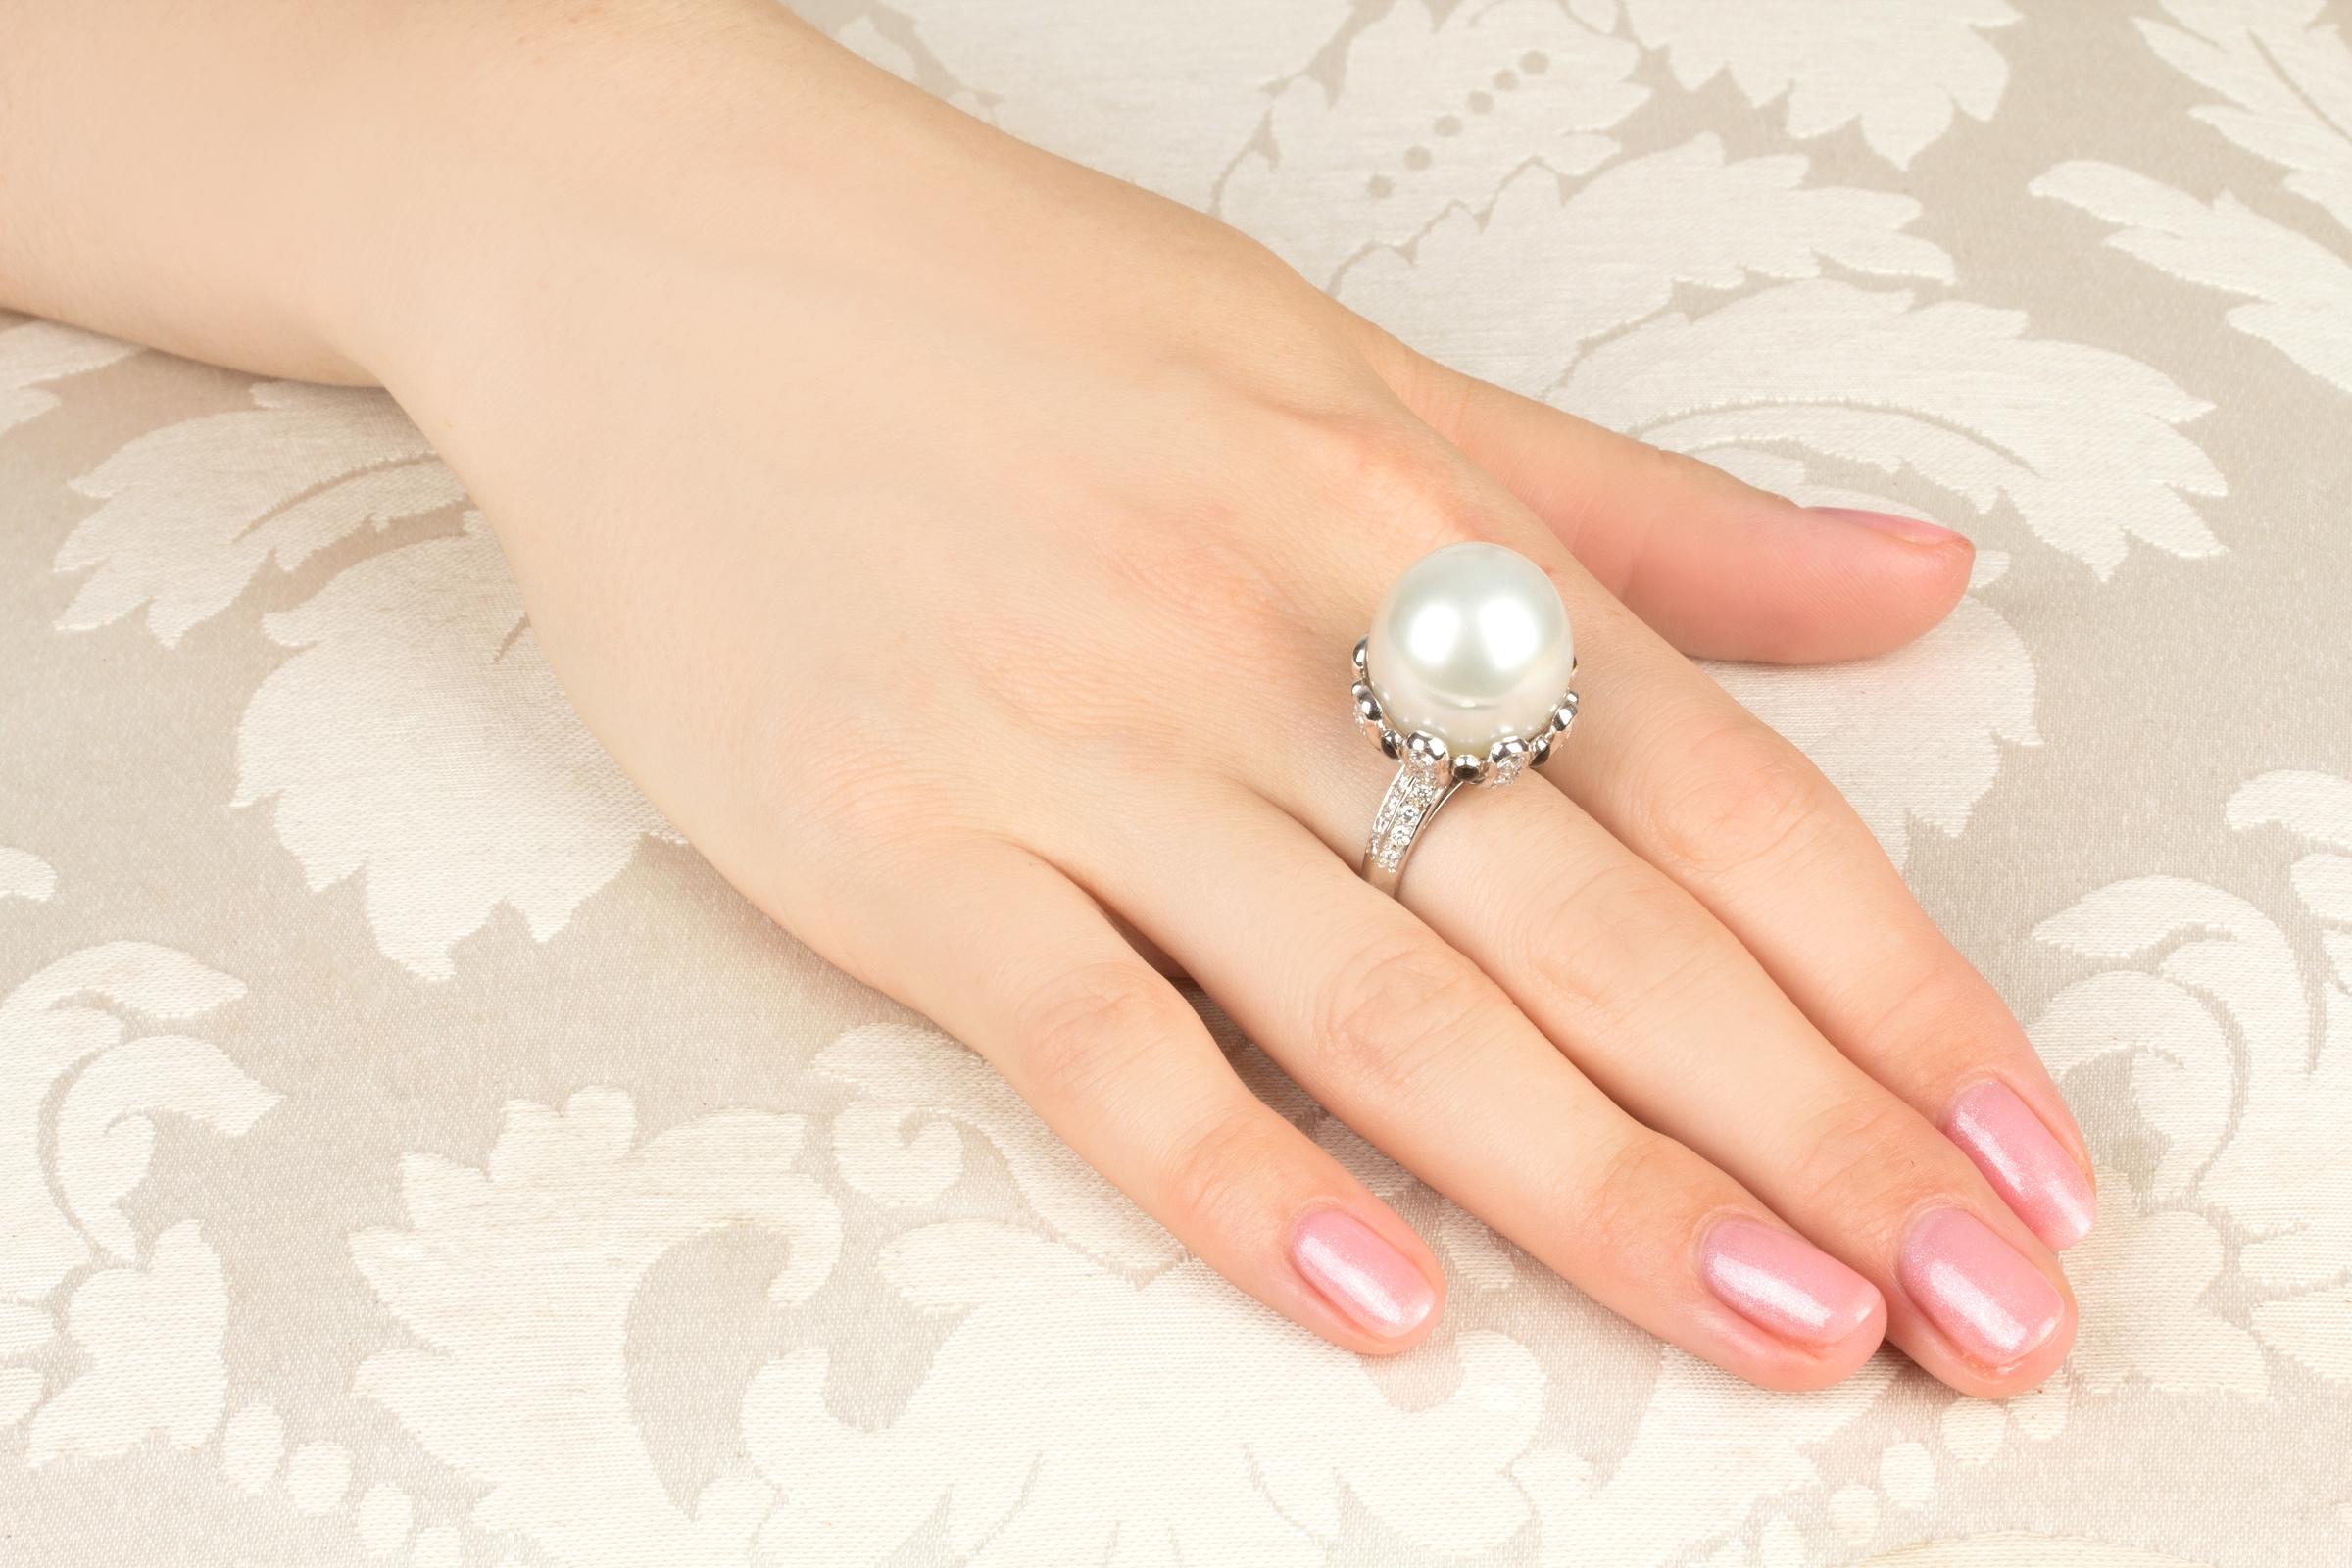 This South Sea pearl and diamond cocktail ring features a large and lovely Australian pearl of 17mm diameter. The pearl is untreated. It displays fine quality nacre and its natural color and luster have not been enhanced in any way. The pearl is set